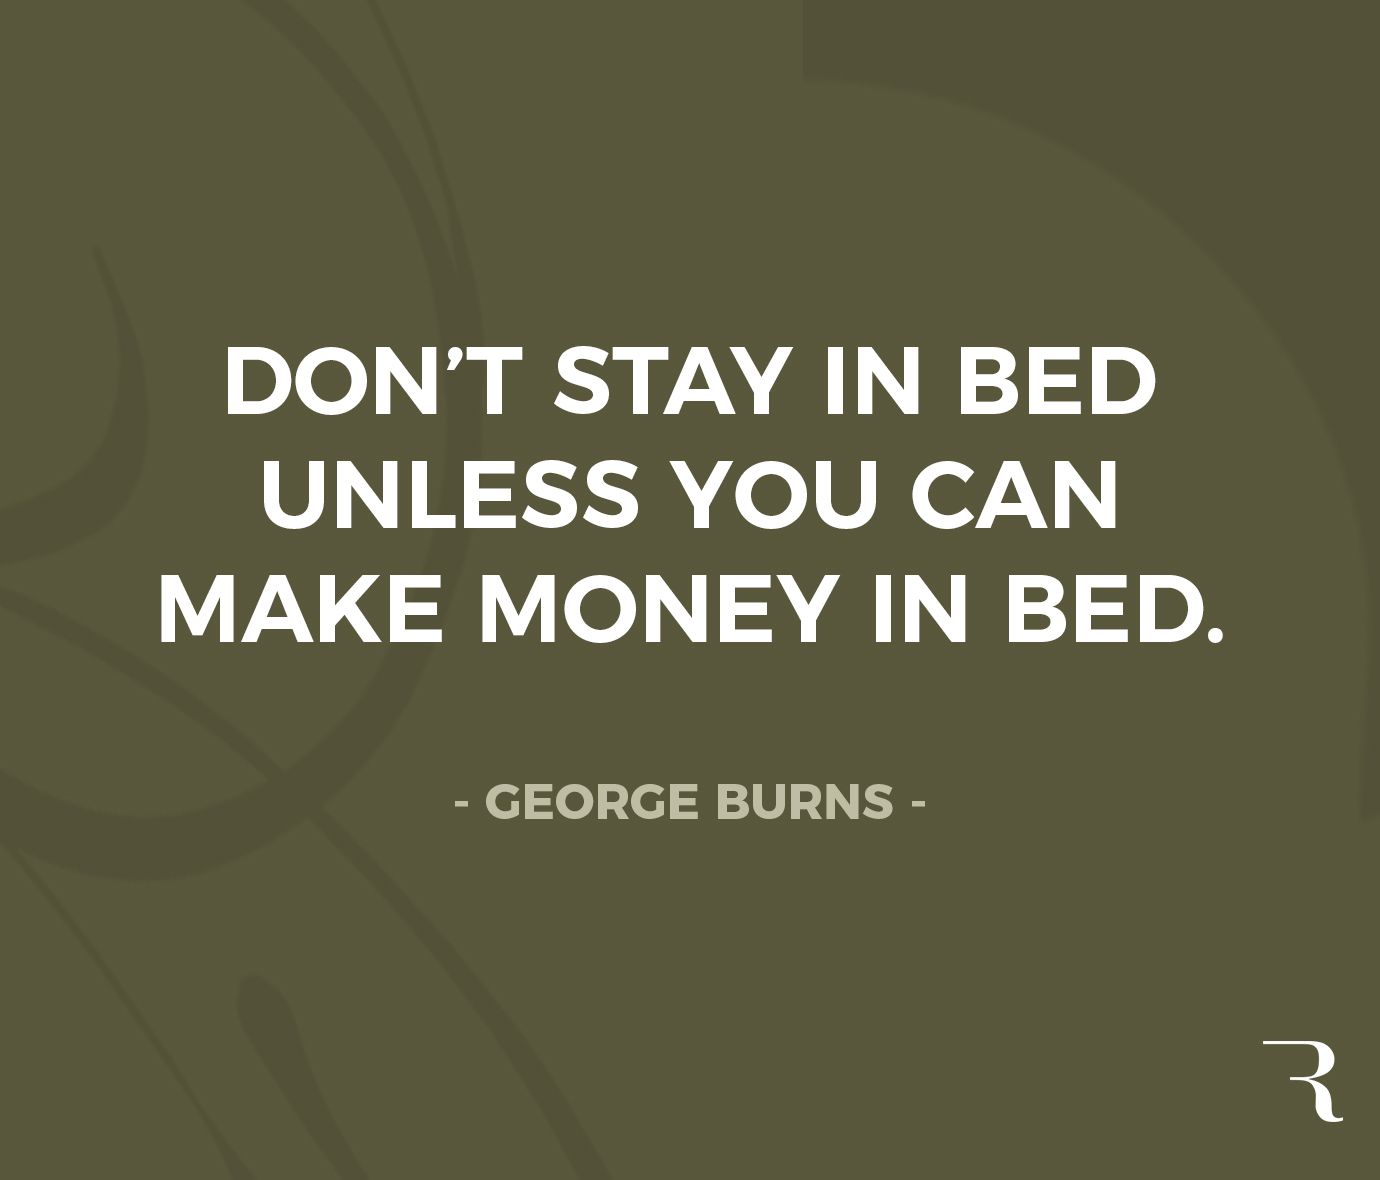 Hustle-Quotes-Motivation_-Don’t-stay-in-bed-unless-you-can.jpg